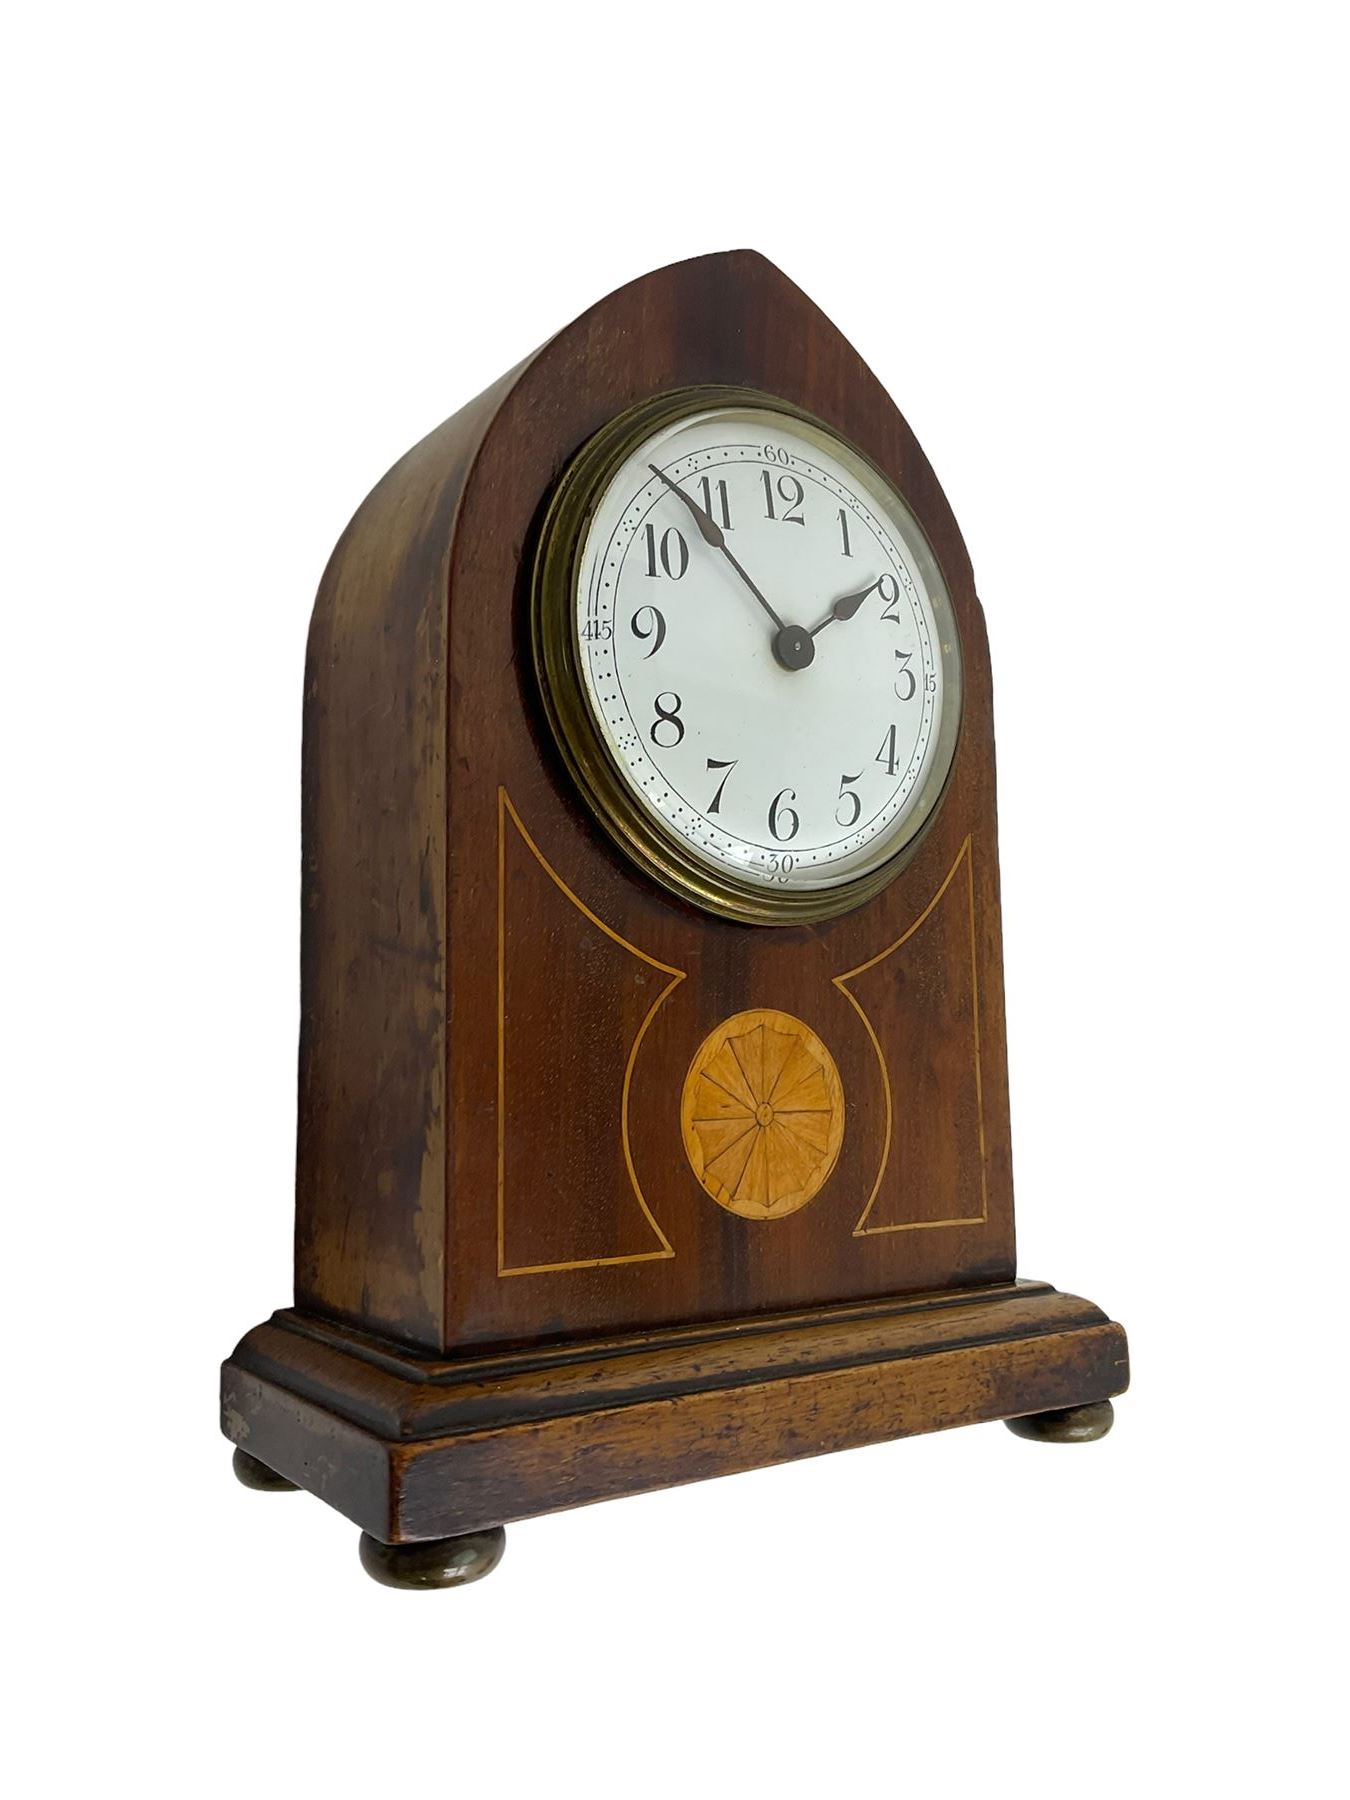 Mahogany cased Lancet clock c1910 with an inlaid cartouche and satinwood stringing - Image 2 of 3